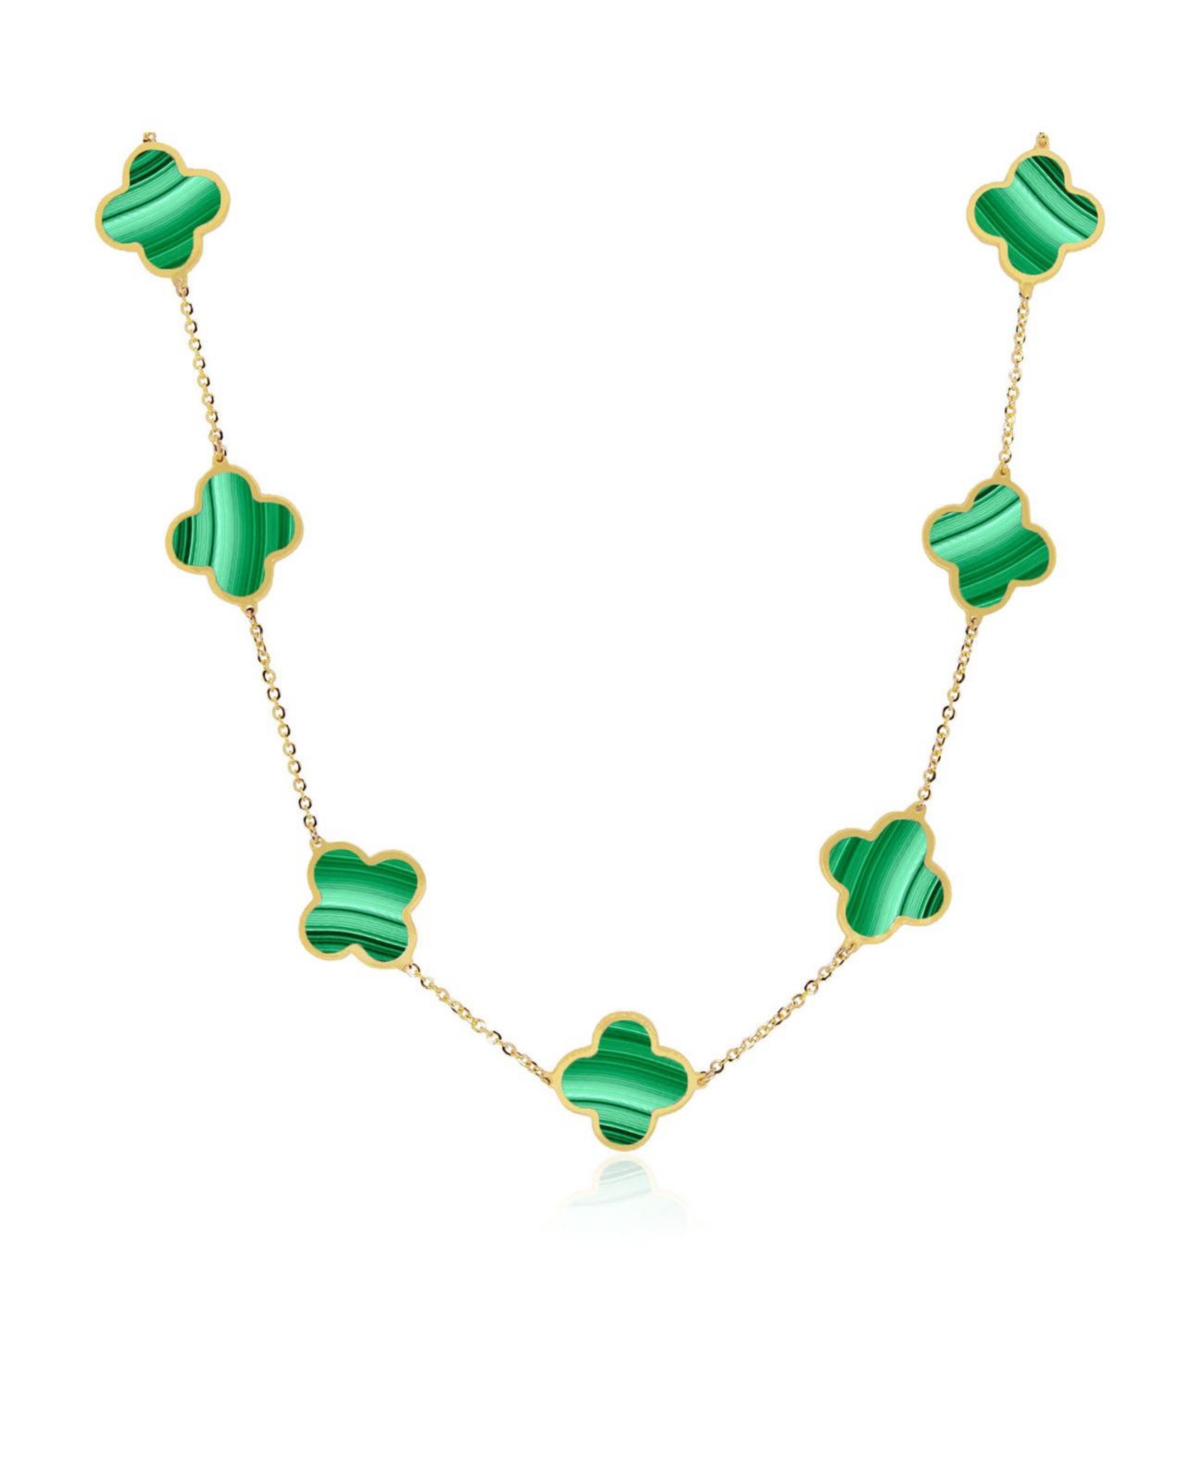 Large Malachite Clover Necklace - Green